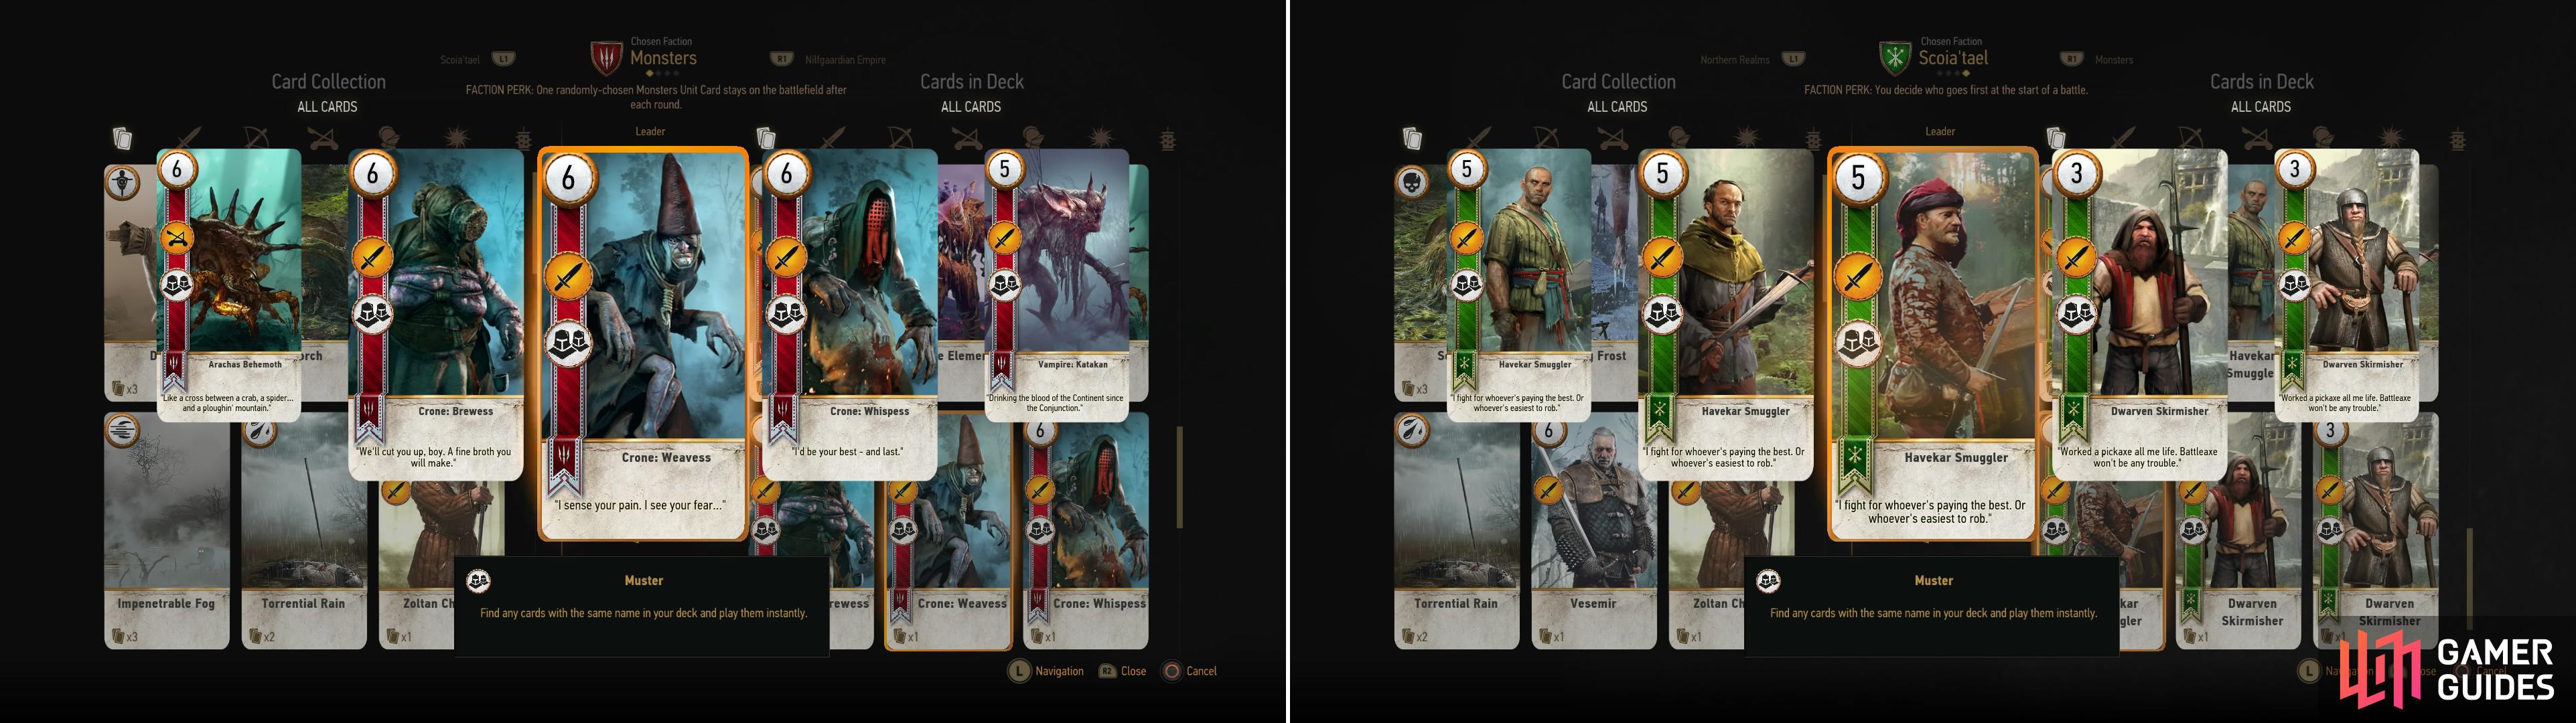 Monster decks (left) and Scoia'tael decks (right) both rely primarily on cards with the "Muster" ability to over-power opponents. Play one "Muster" card and all related "Muster" cards will automatically be put into play.